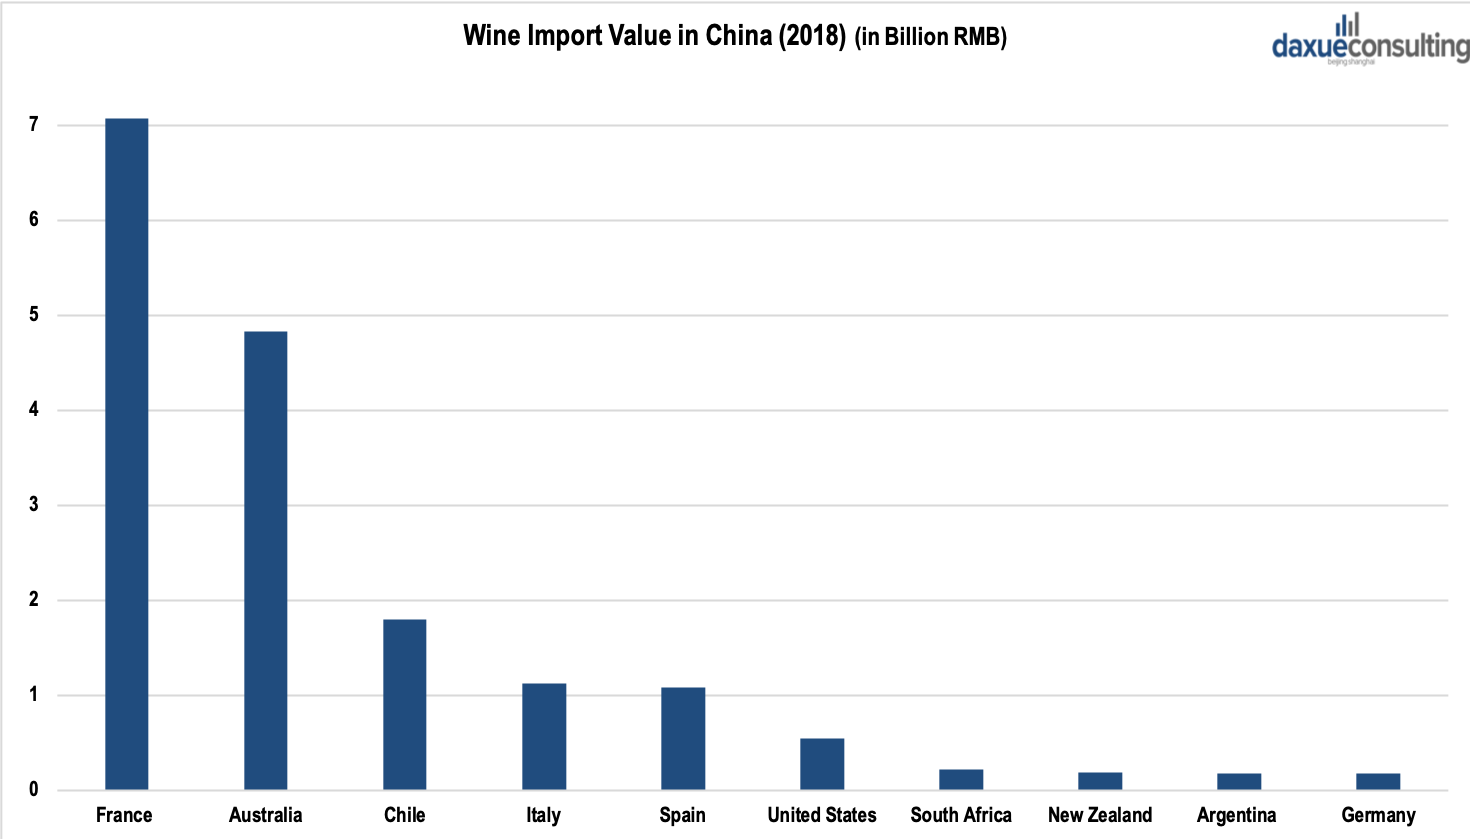 Wine Import Volume in China by Country